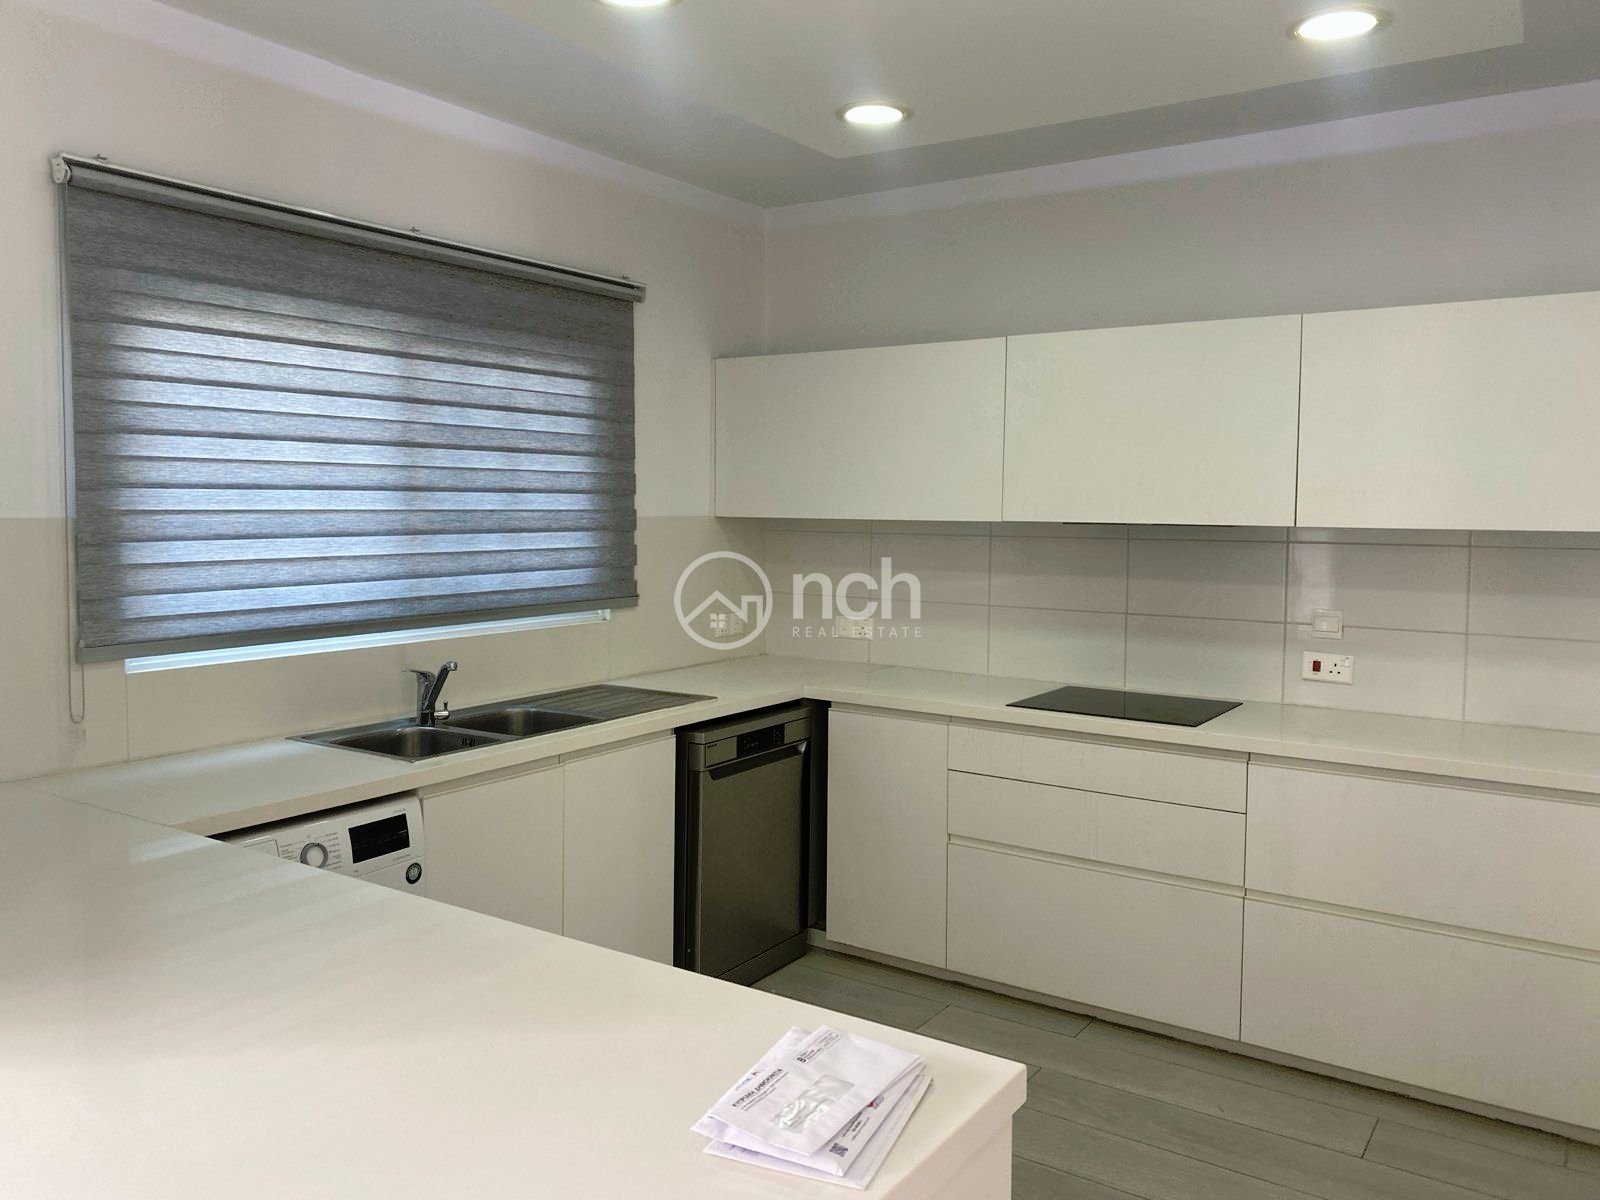 4 Bedroom House for Sale in Nicosia